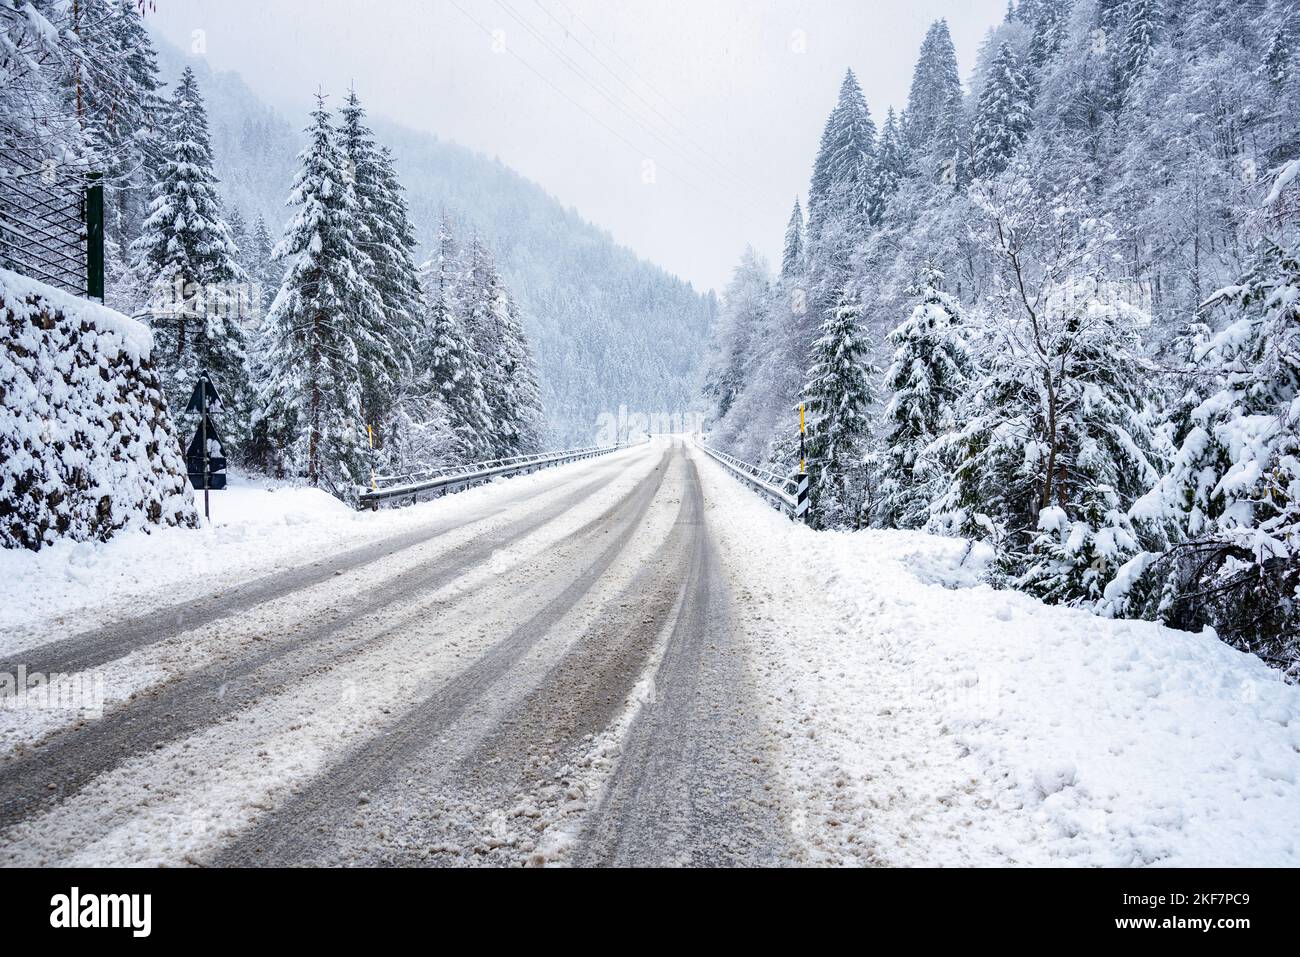 Deserted road covered in fresh snow in the mountains during a blizzard Stock Photo